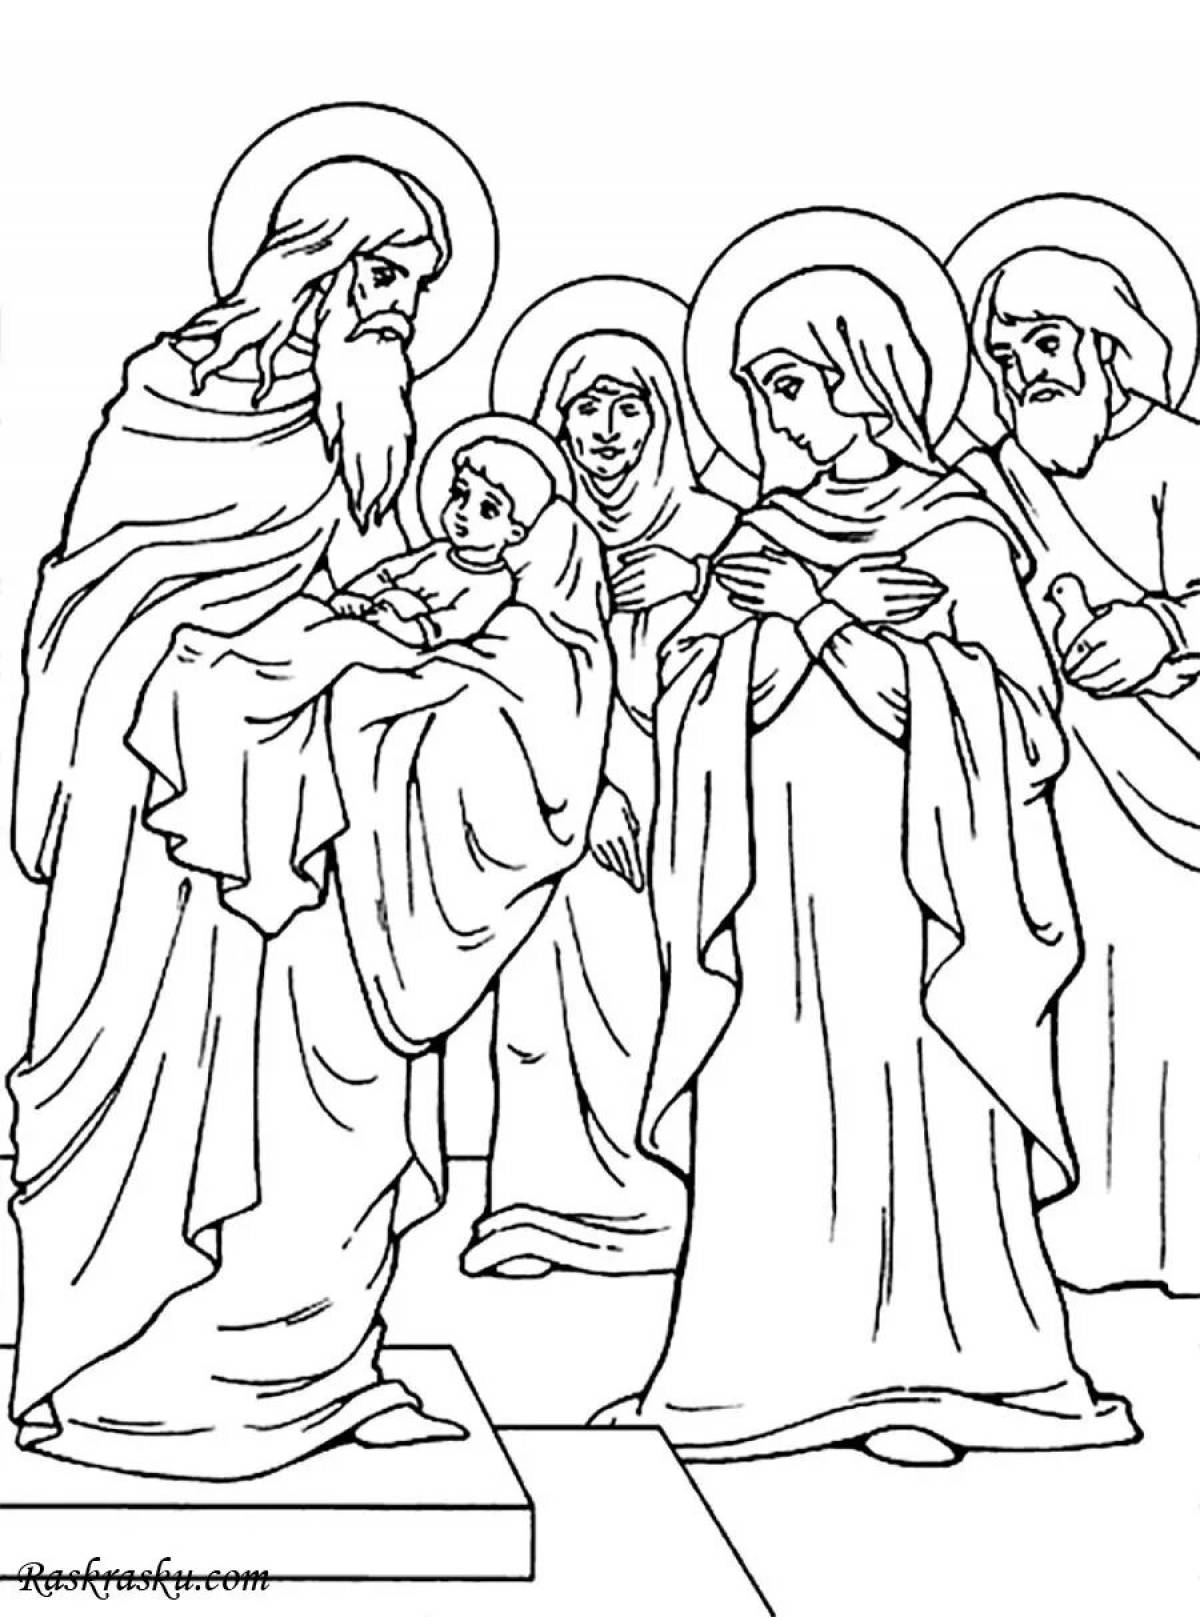 Coloring page celestial meeting of the Lord